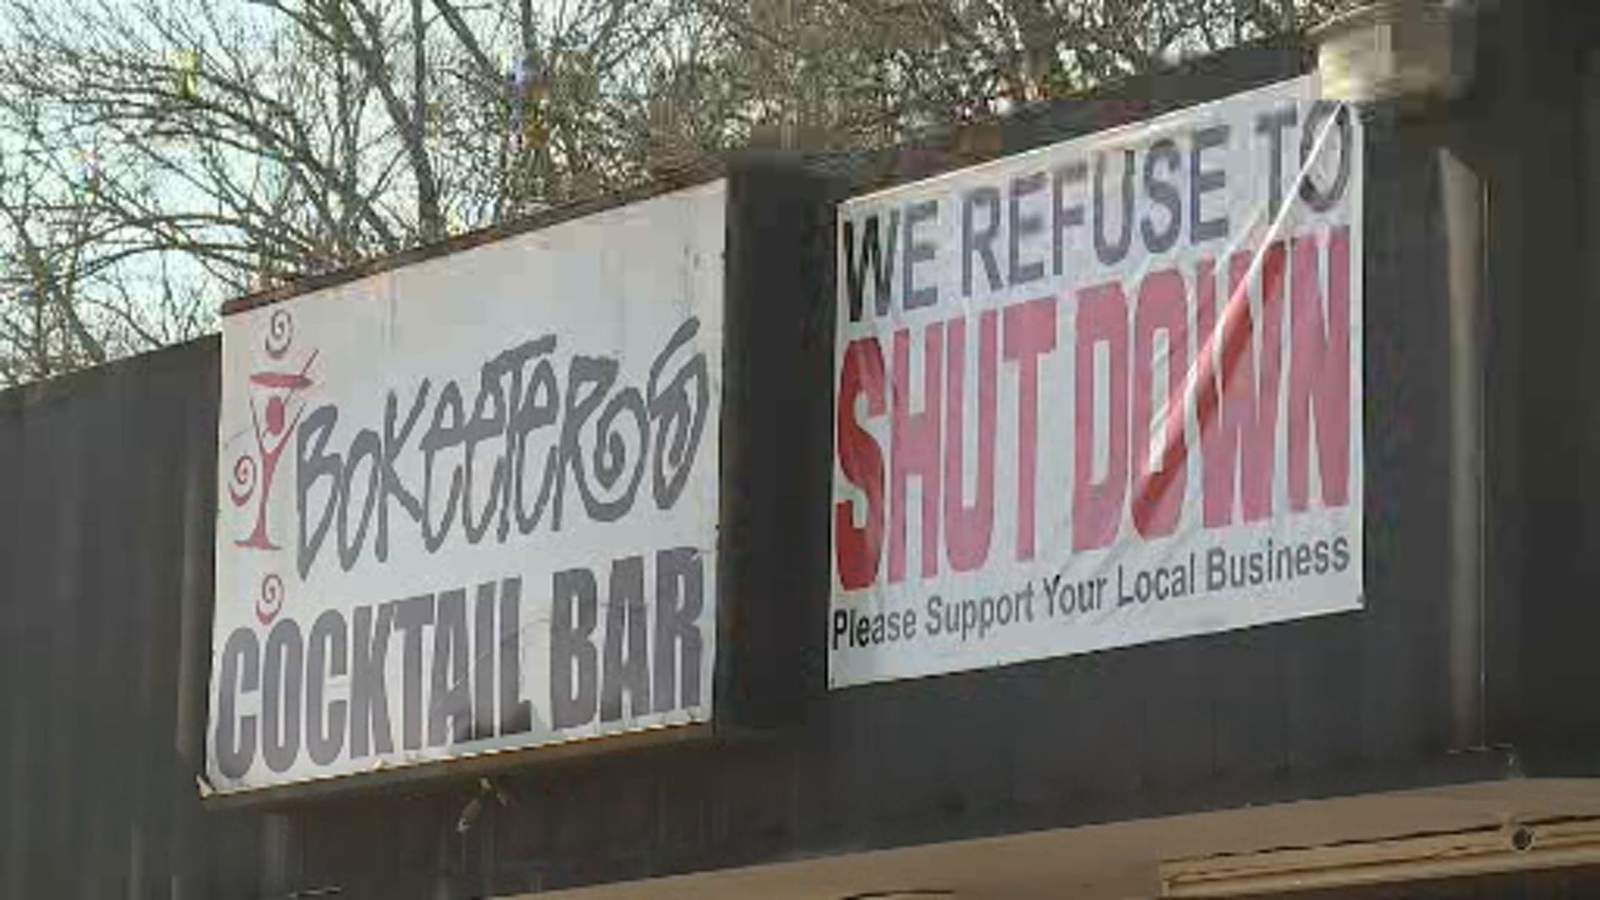 Bar owners face uncertain future with rollback in reopenings